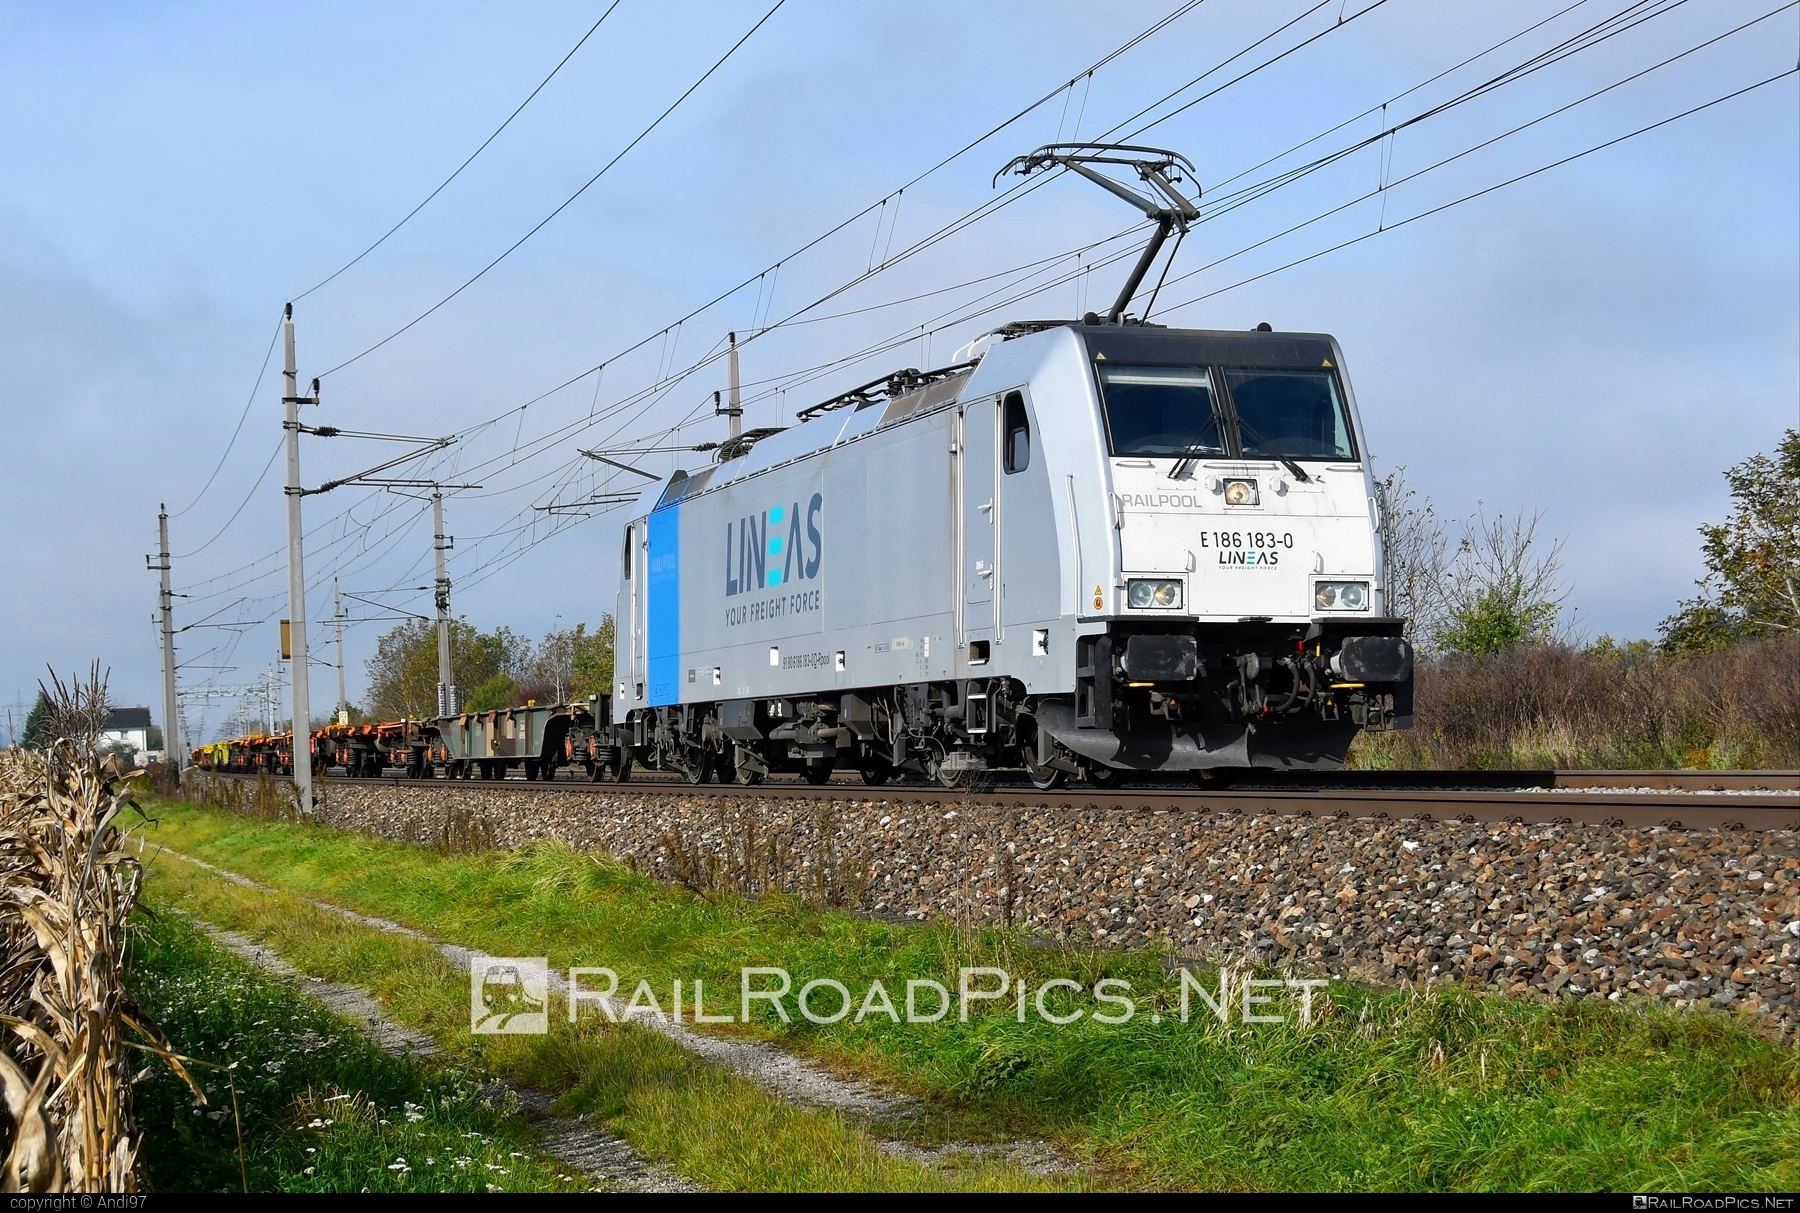 Bombardier TRAXX F140 MS - E 186 183-0 operated by Lineas Group SA/NV #bombardier #bombardiertraxx #flatwagon #lineas #railpool #railpoolgmbh #traxx #traxxf140 #traxxf140ms